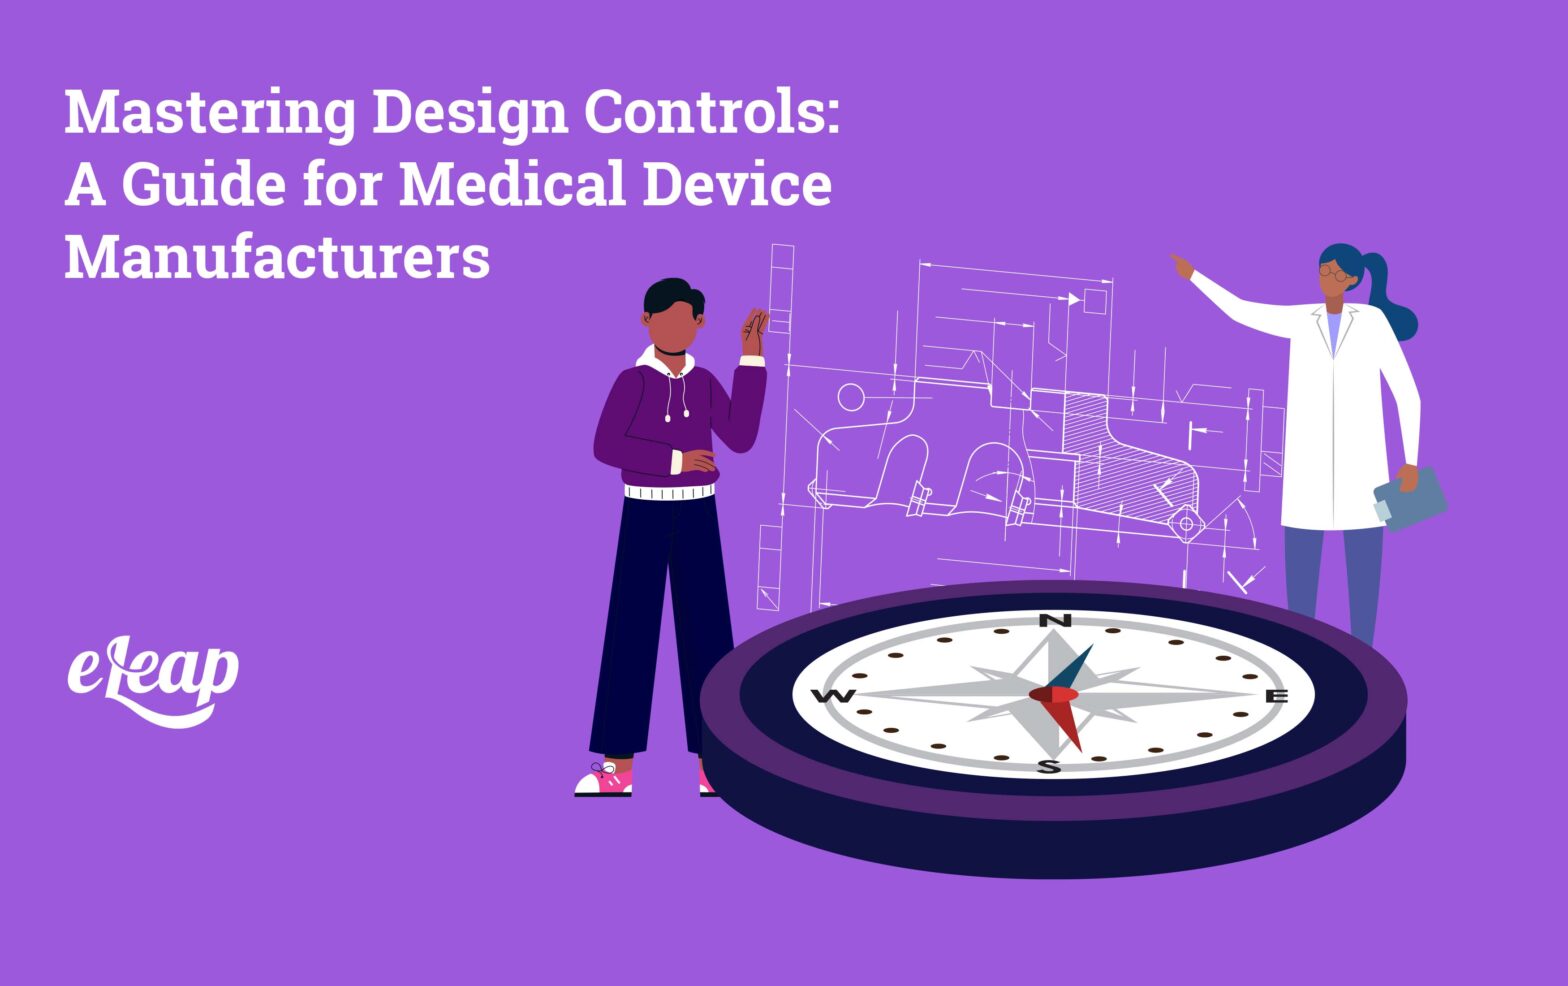 Mastering Design Controls: A Guide for Medical Device Manufacturers